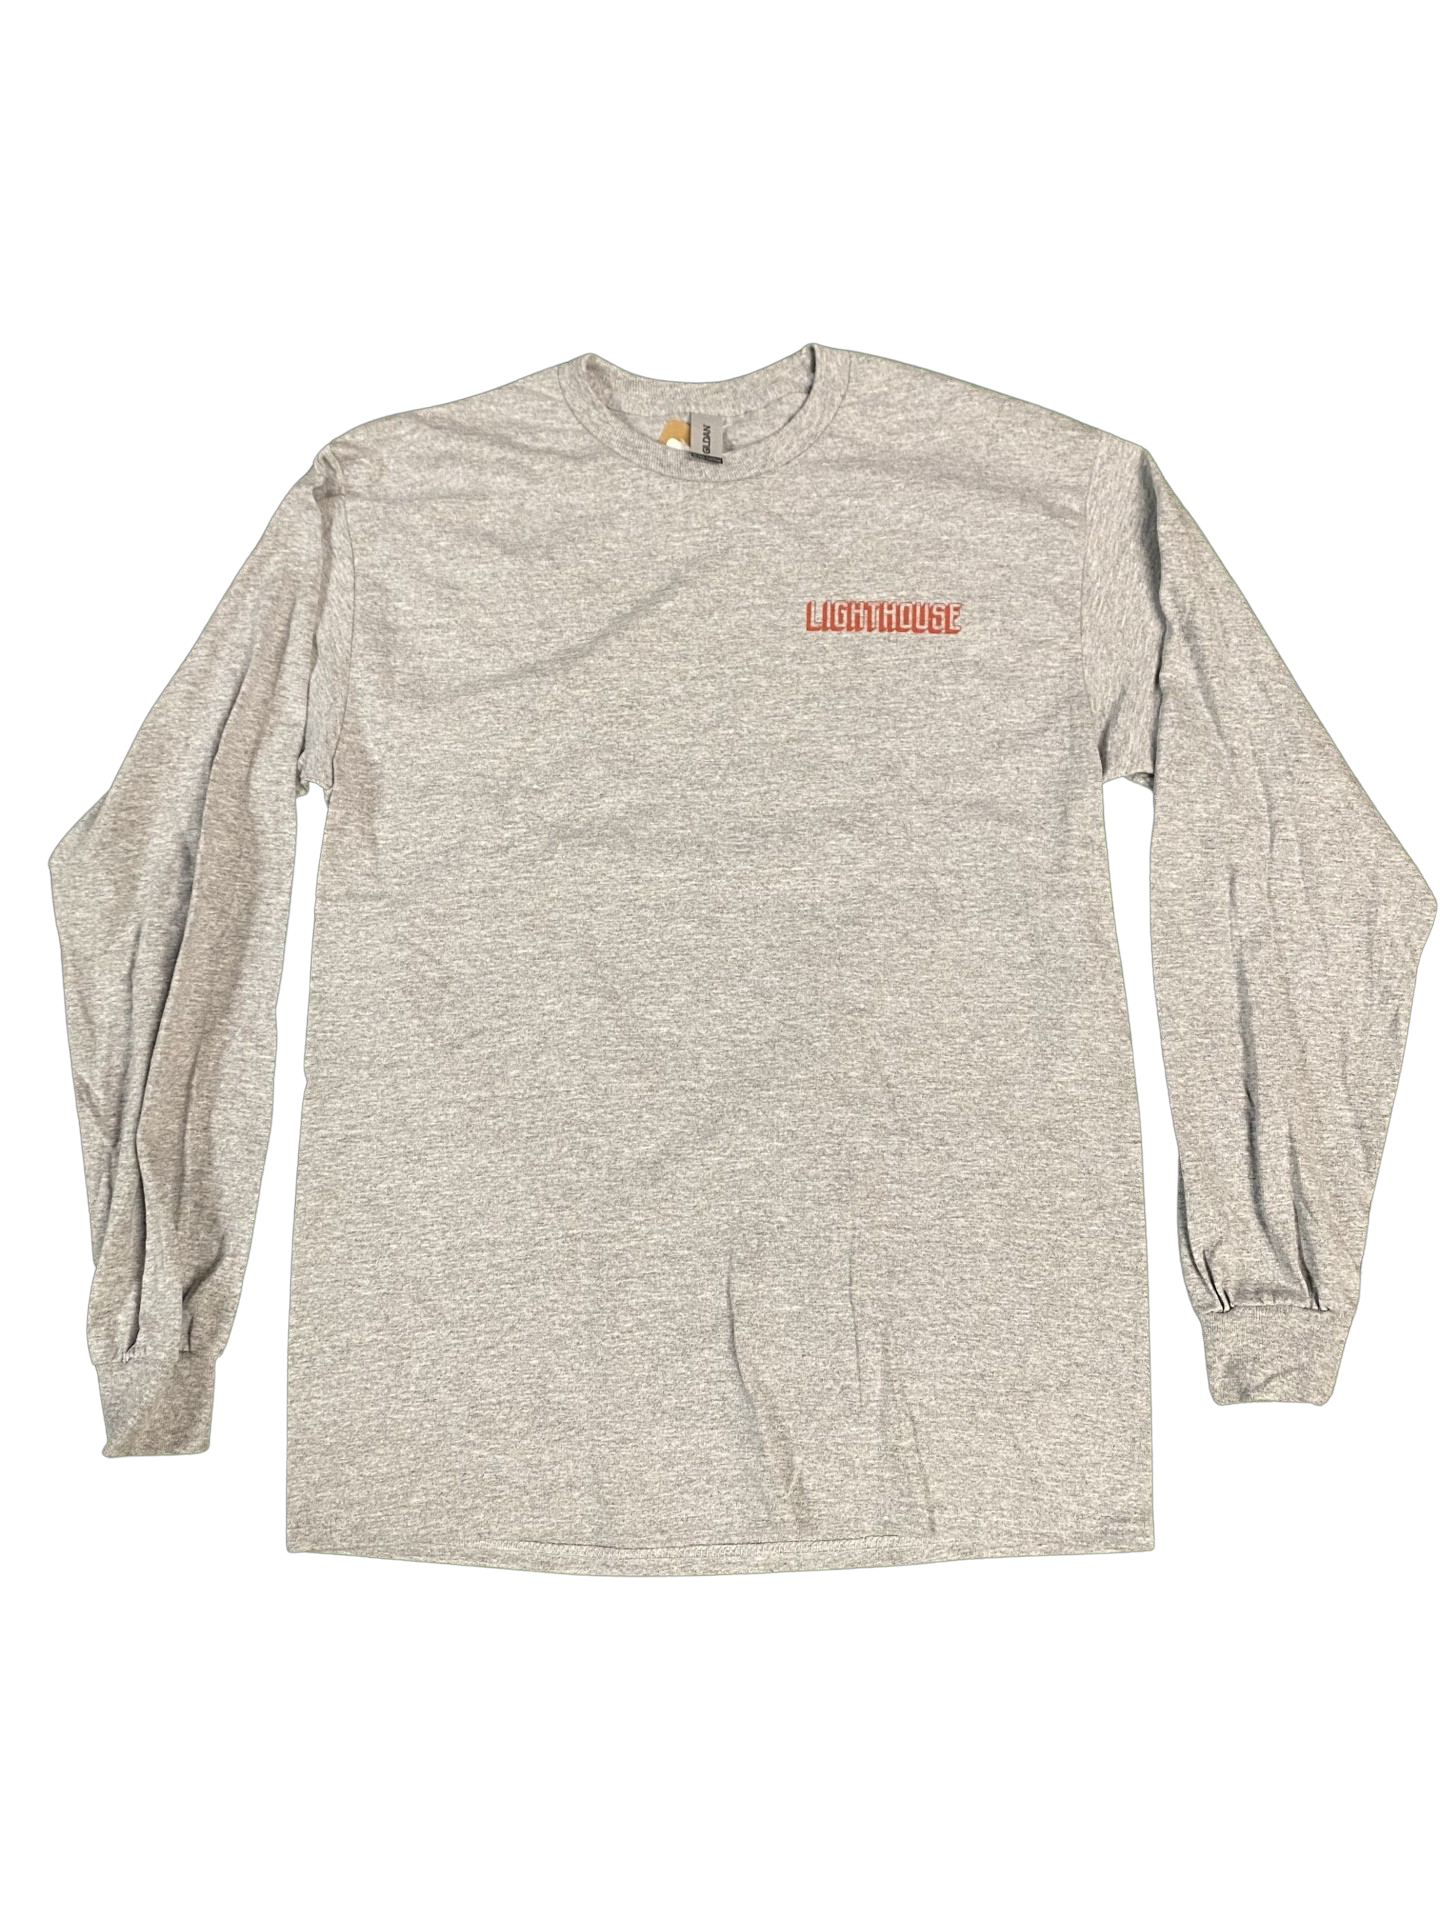 Lighthouse Store Front Long Sleeve Shirt